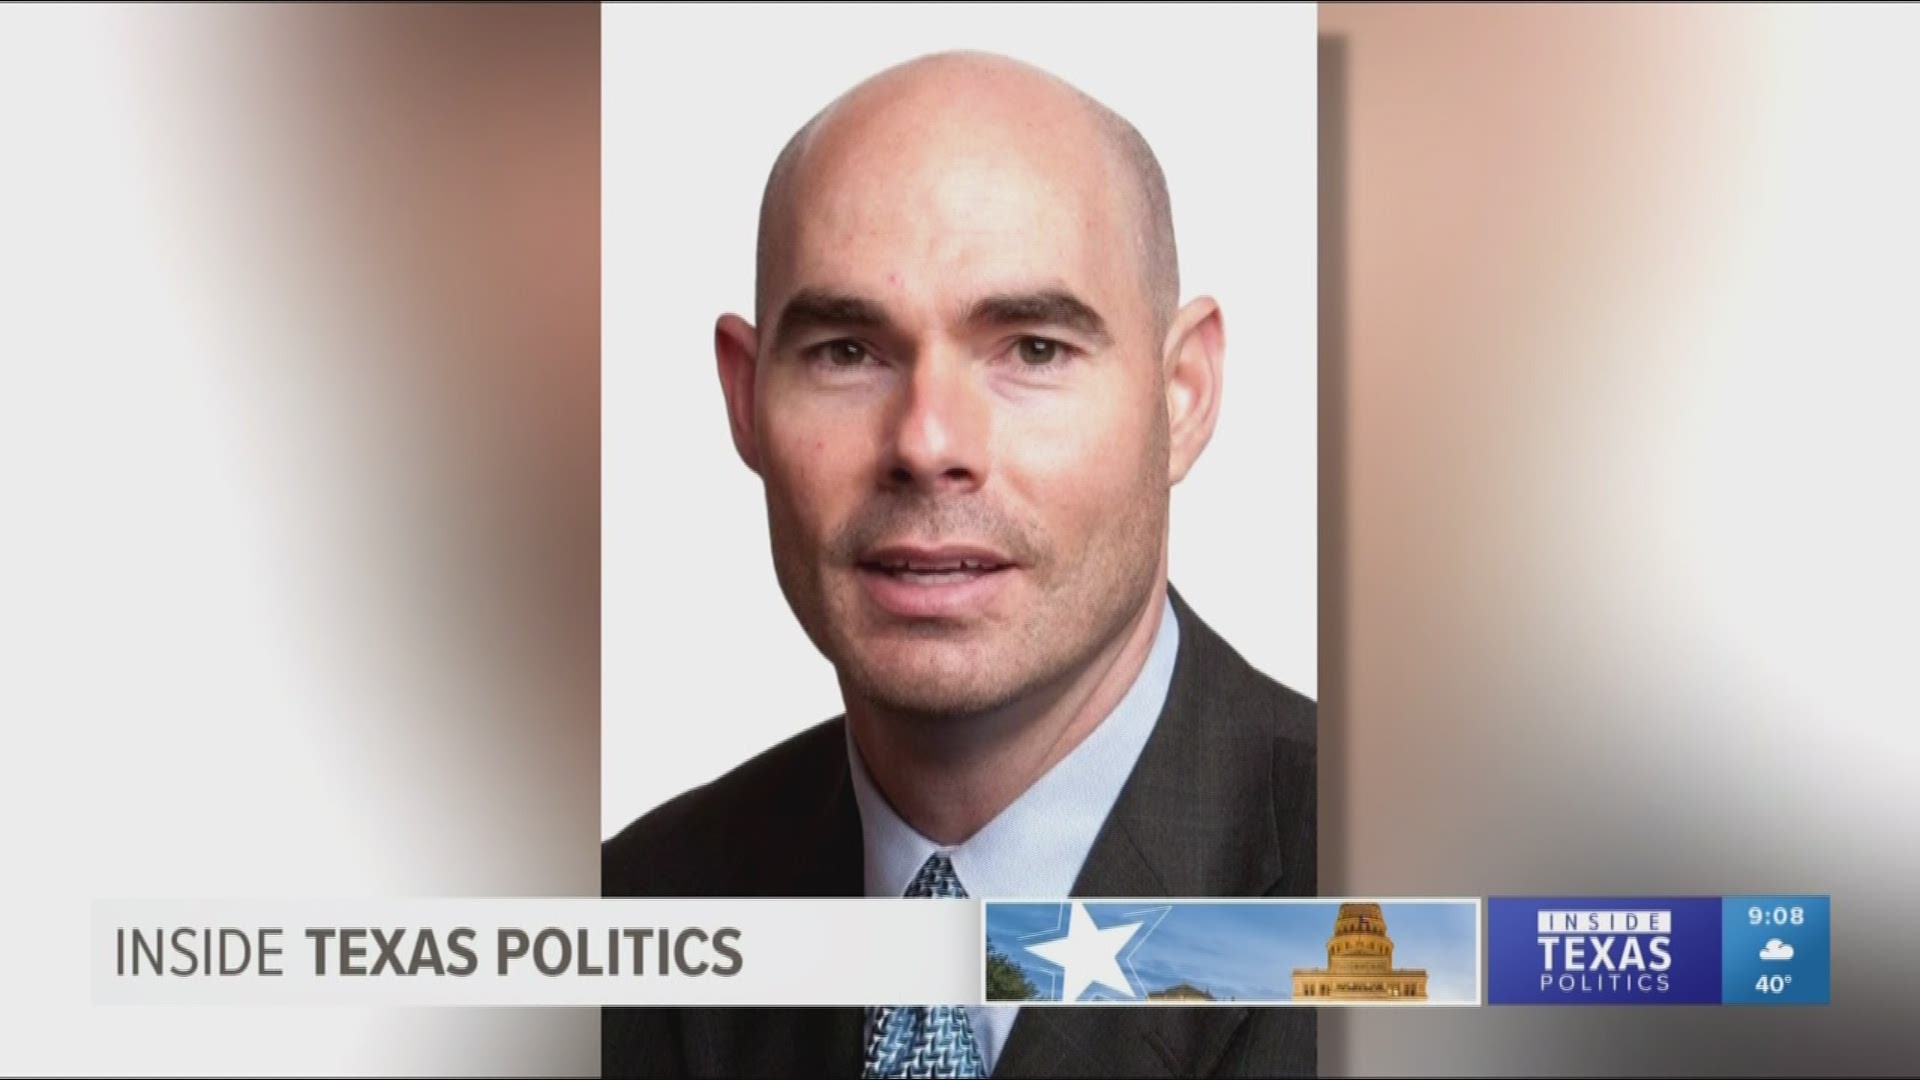 Republican State Representative Dennis Bonnen is presumed to be the next Speaker of the Texas House. Rep. Bonnen, said last week that he has the votes to take the gavel when the legislature reconvenes in January 2019.  Ross Ramsey, co-founder and executiv